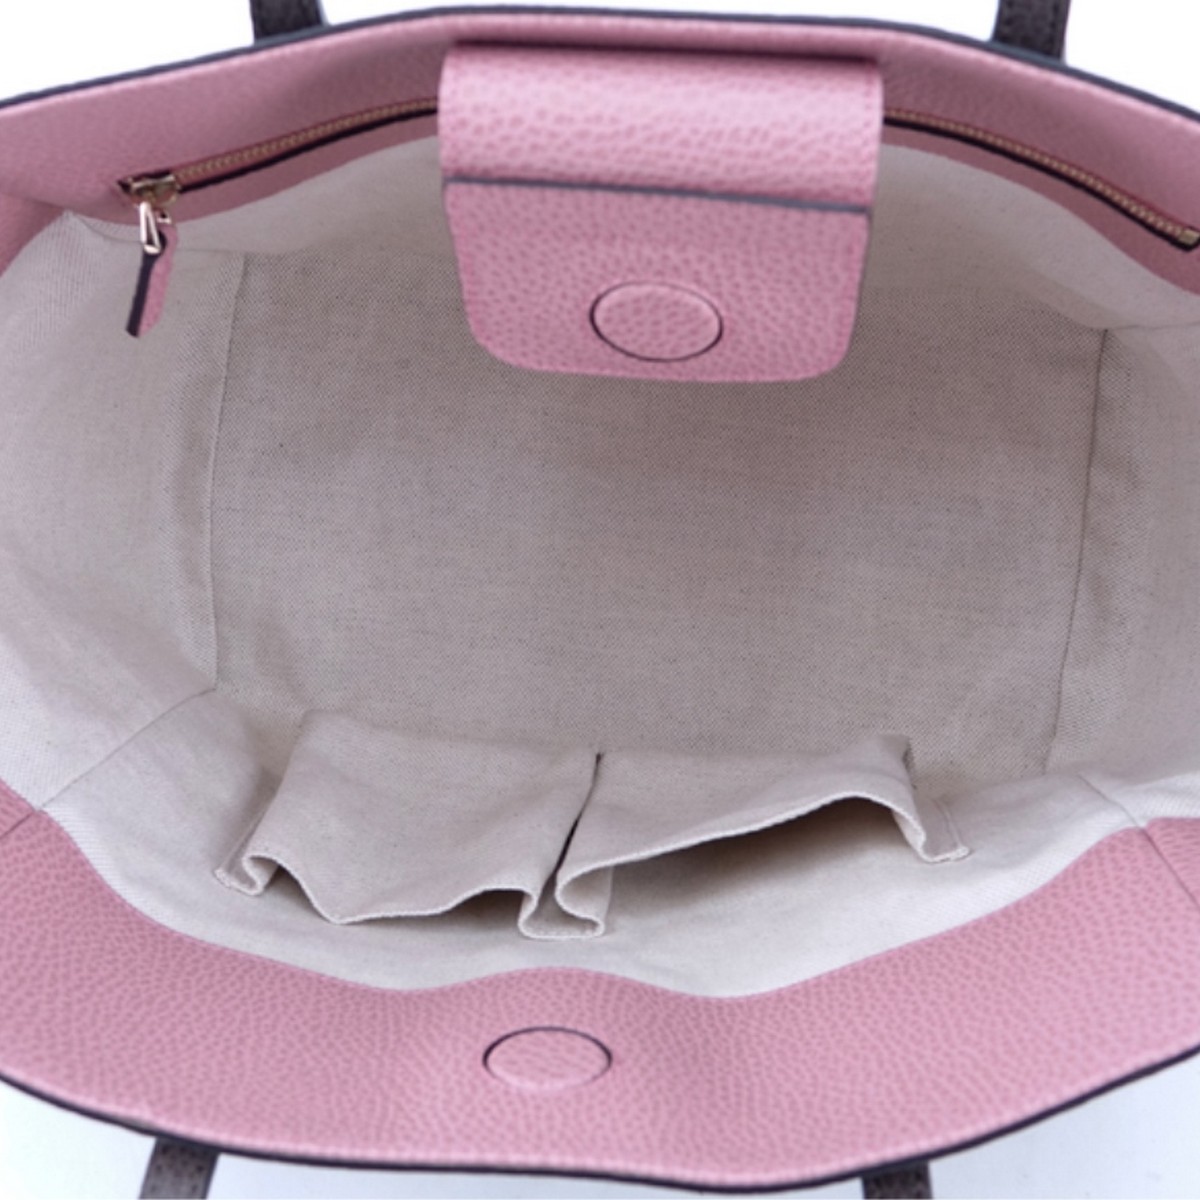 Gucci Taupe/Light Pink Grained Leather Swing PM